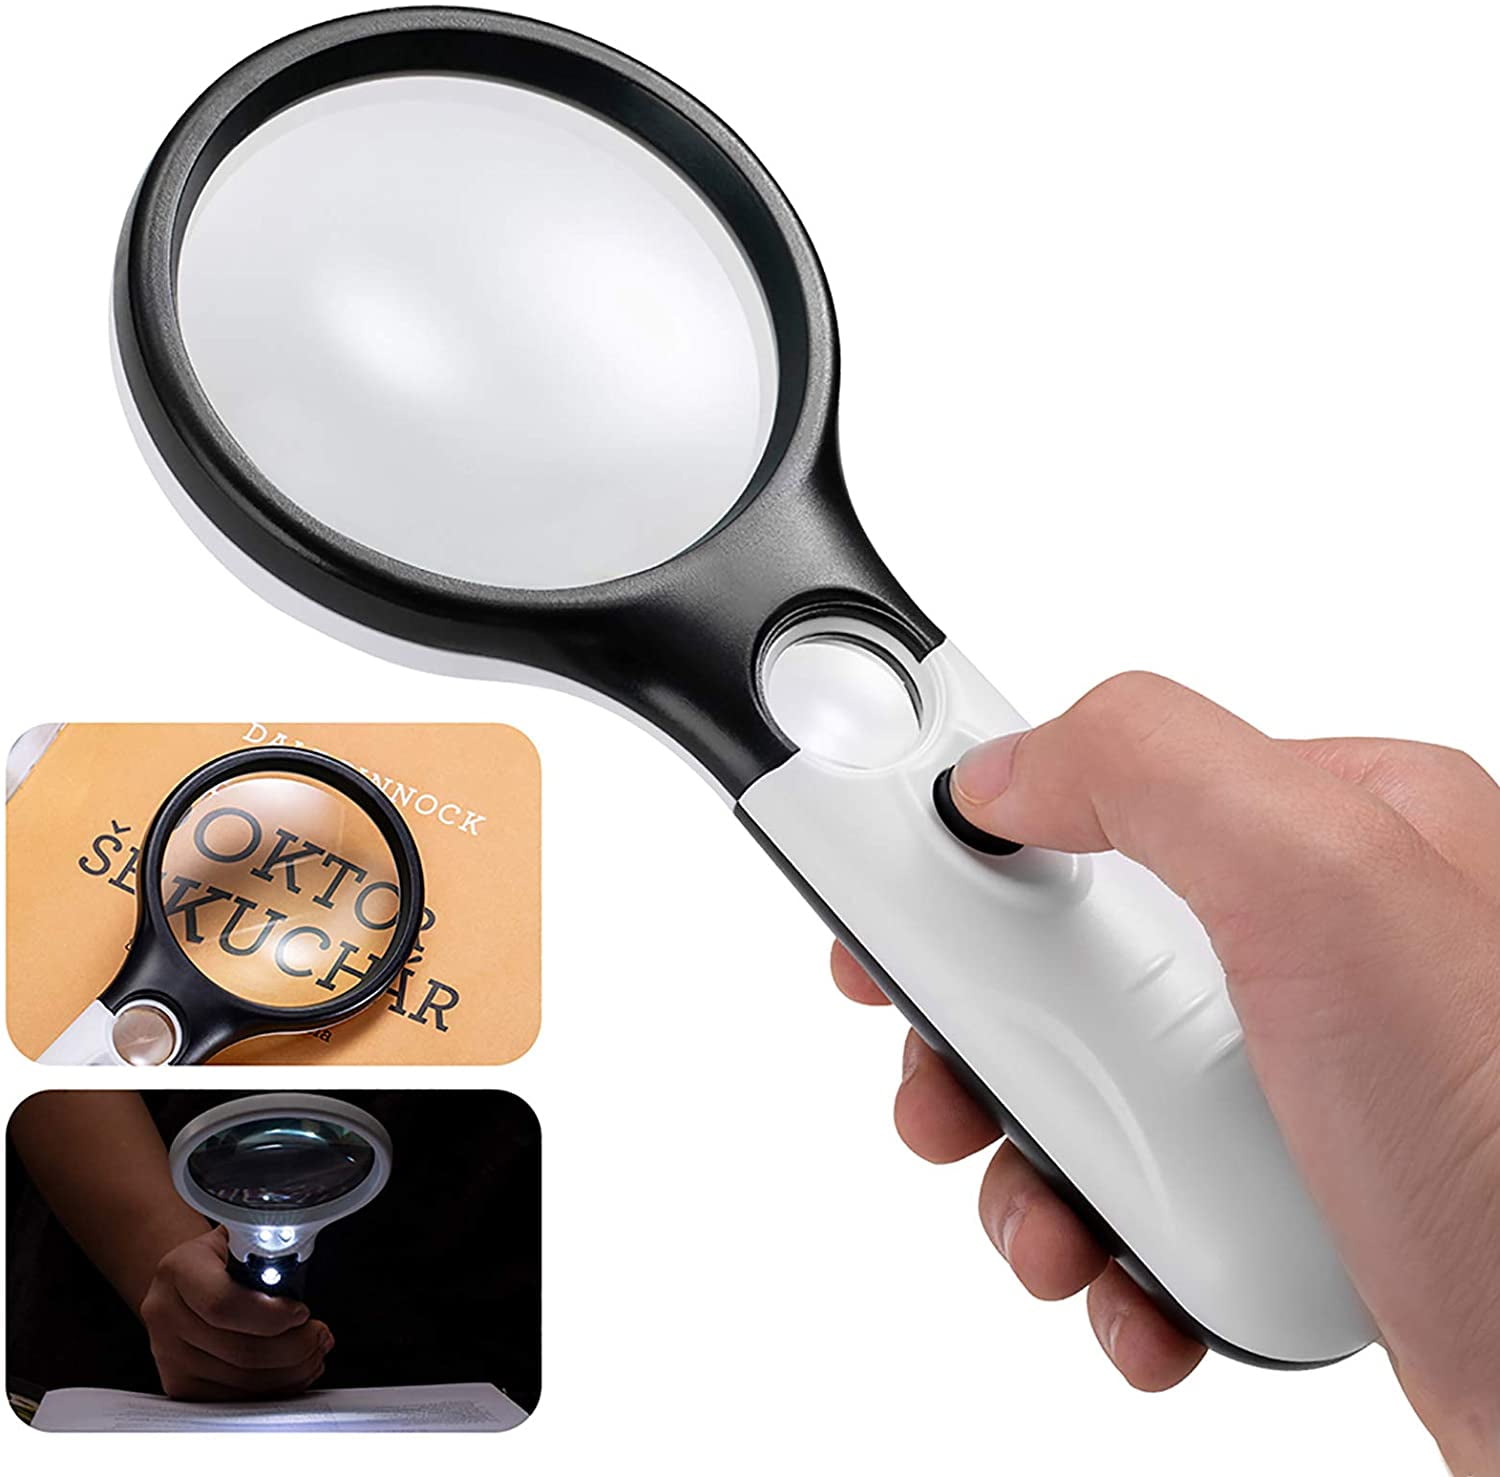 Magnipros 10X Magnifying Glass 